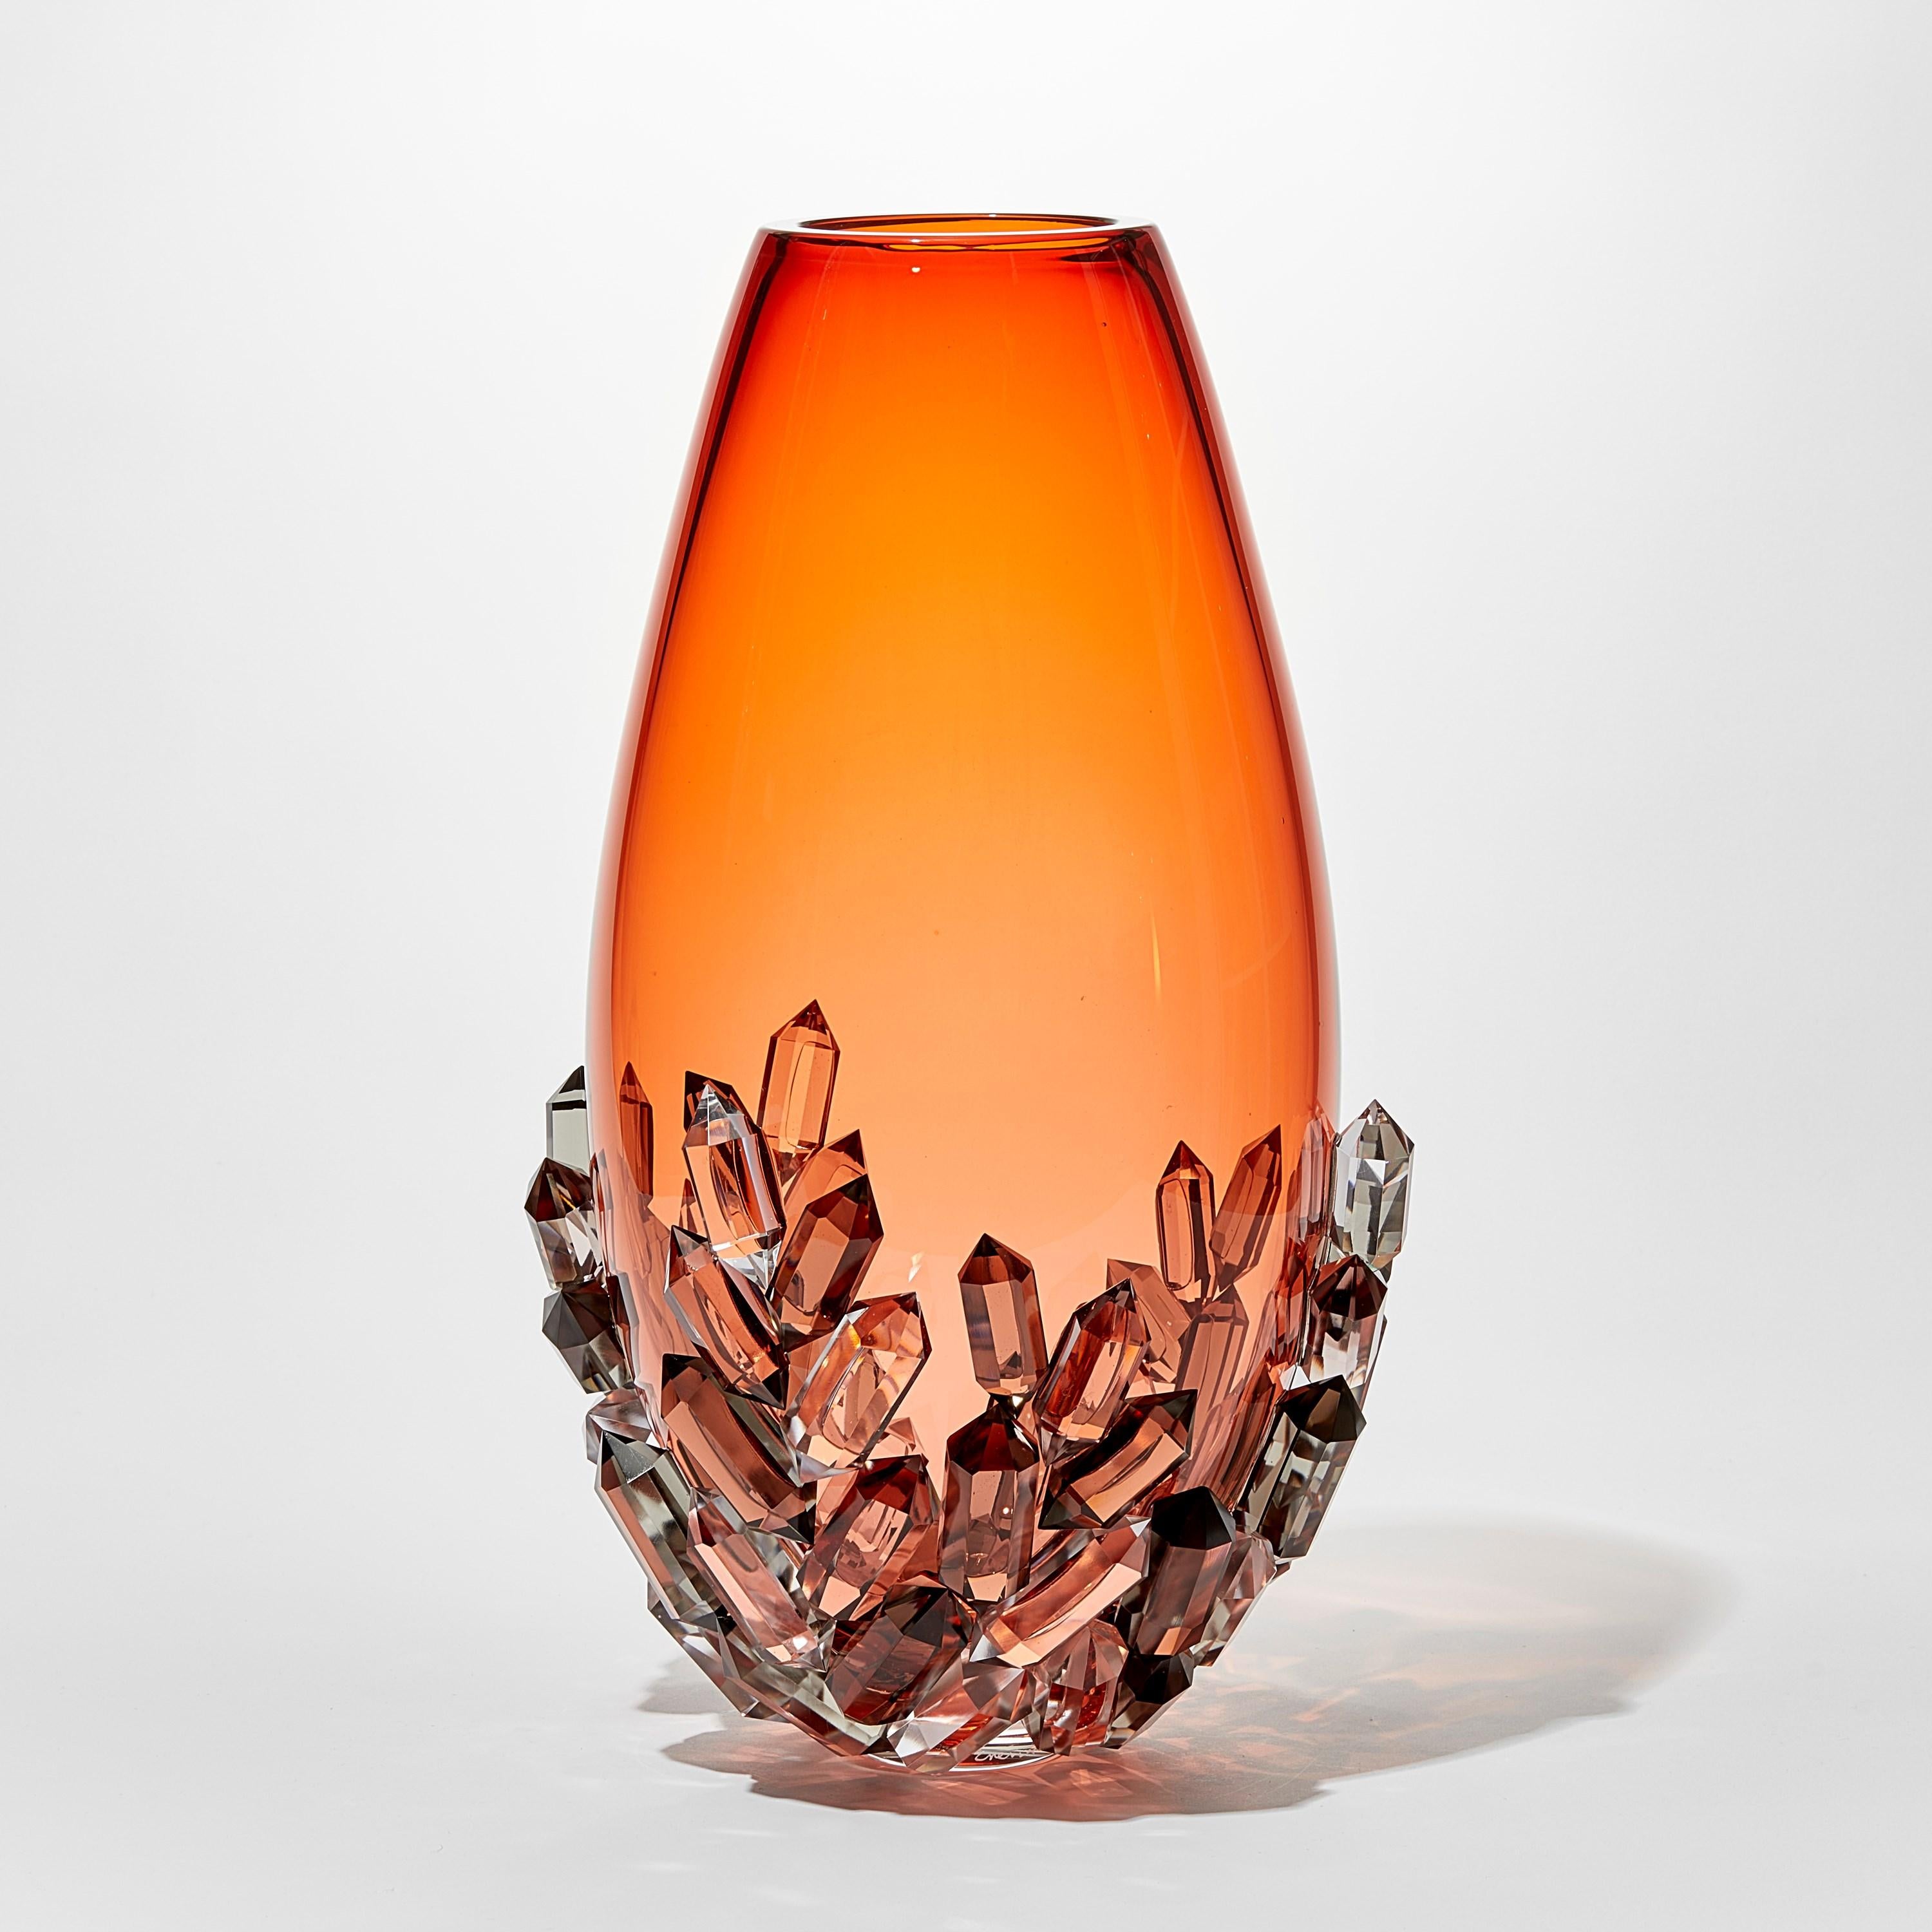 'Cristallized Aurora' is a unique glass sculptural vessel by the Danish artist, Hanne Enemark. The glass body has been hand-blown and painstakingly covered with cast and cut glass crystals, each made by hand by the artist.

With infinite fascination